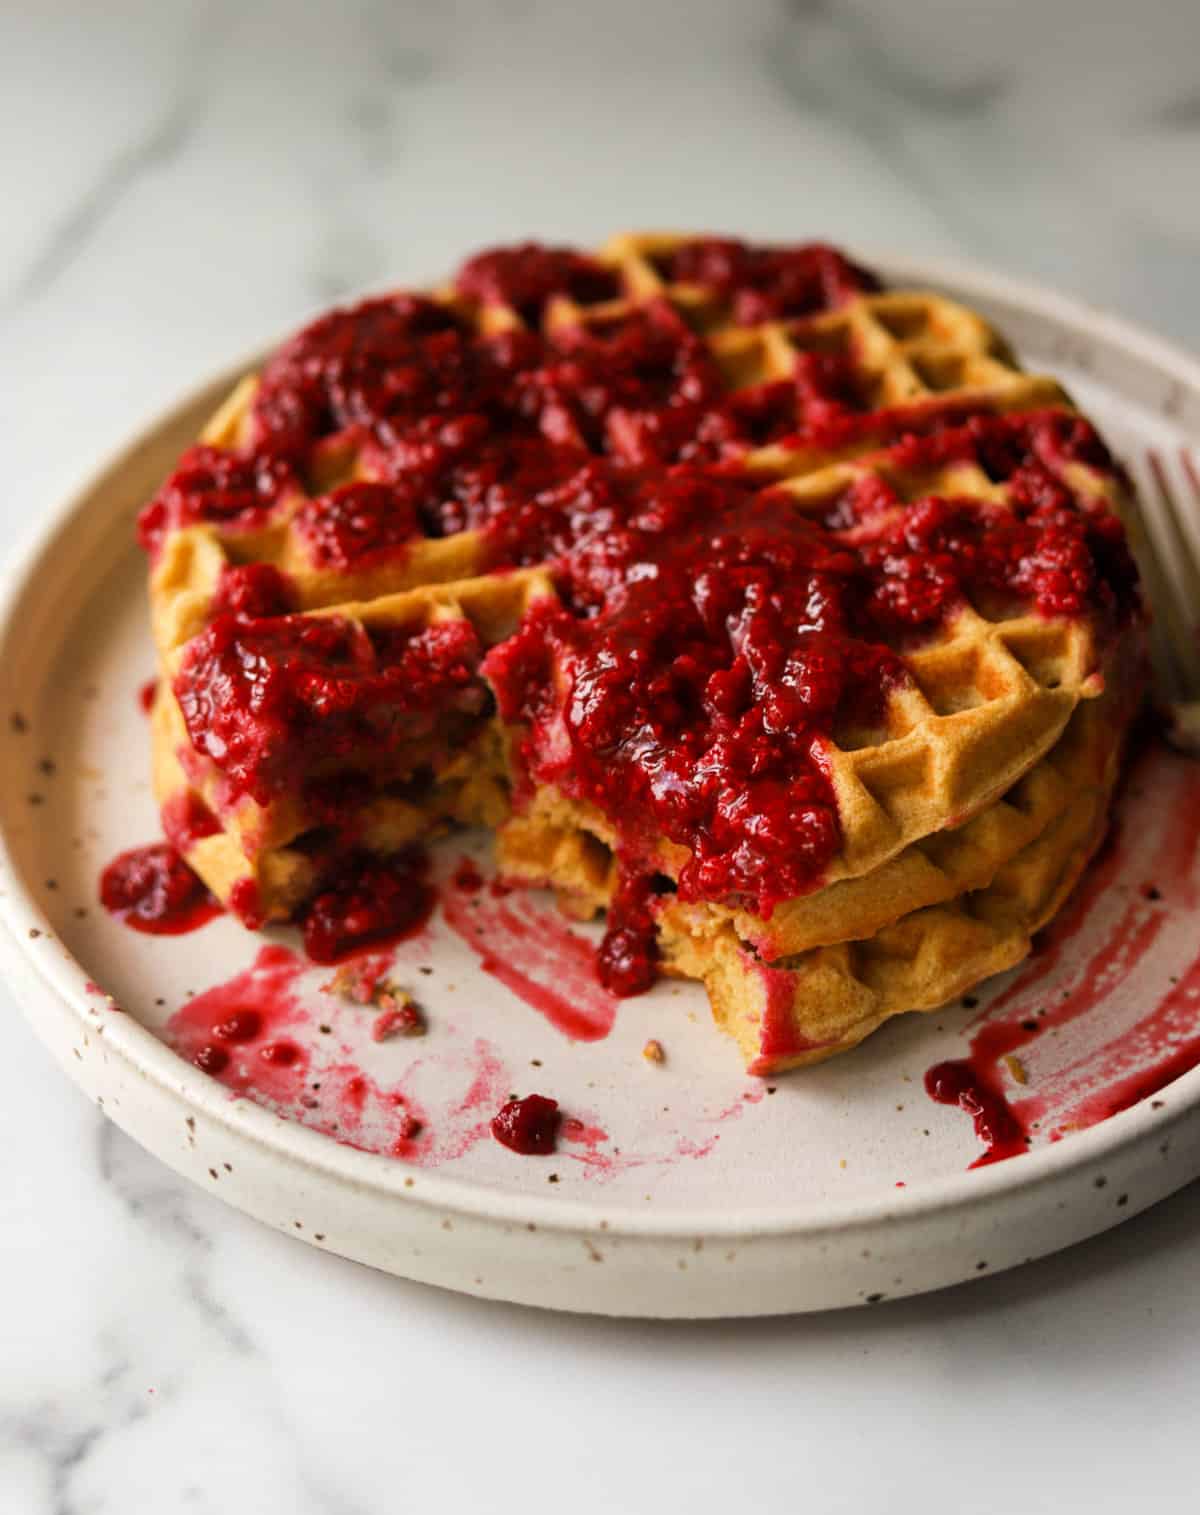 A side shot of a plate of lemon waffles with berry syrup with bites taken out of them.